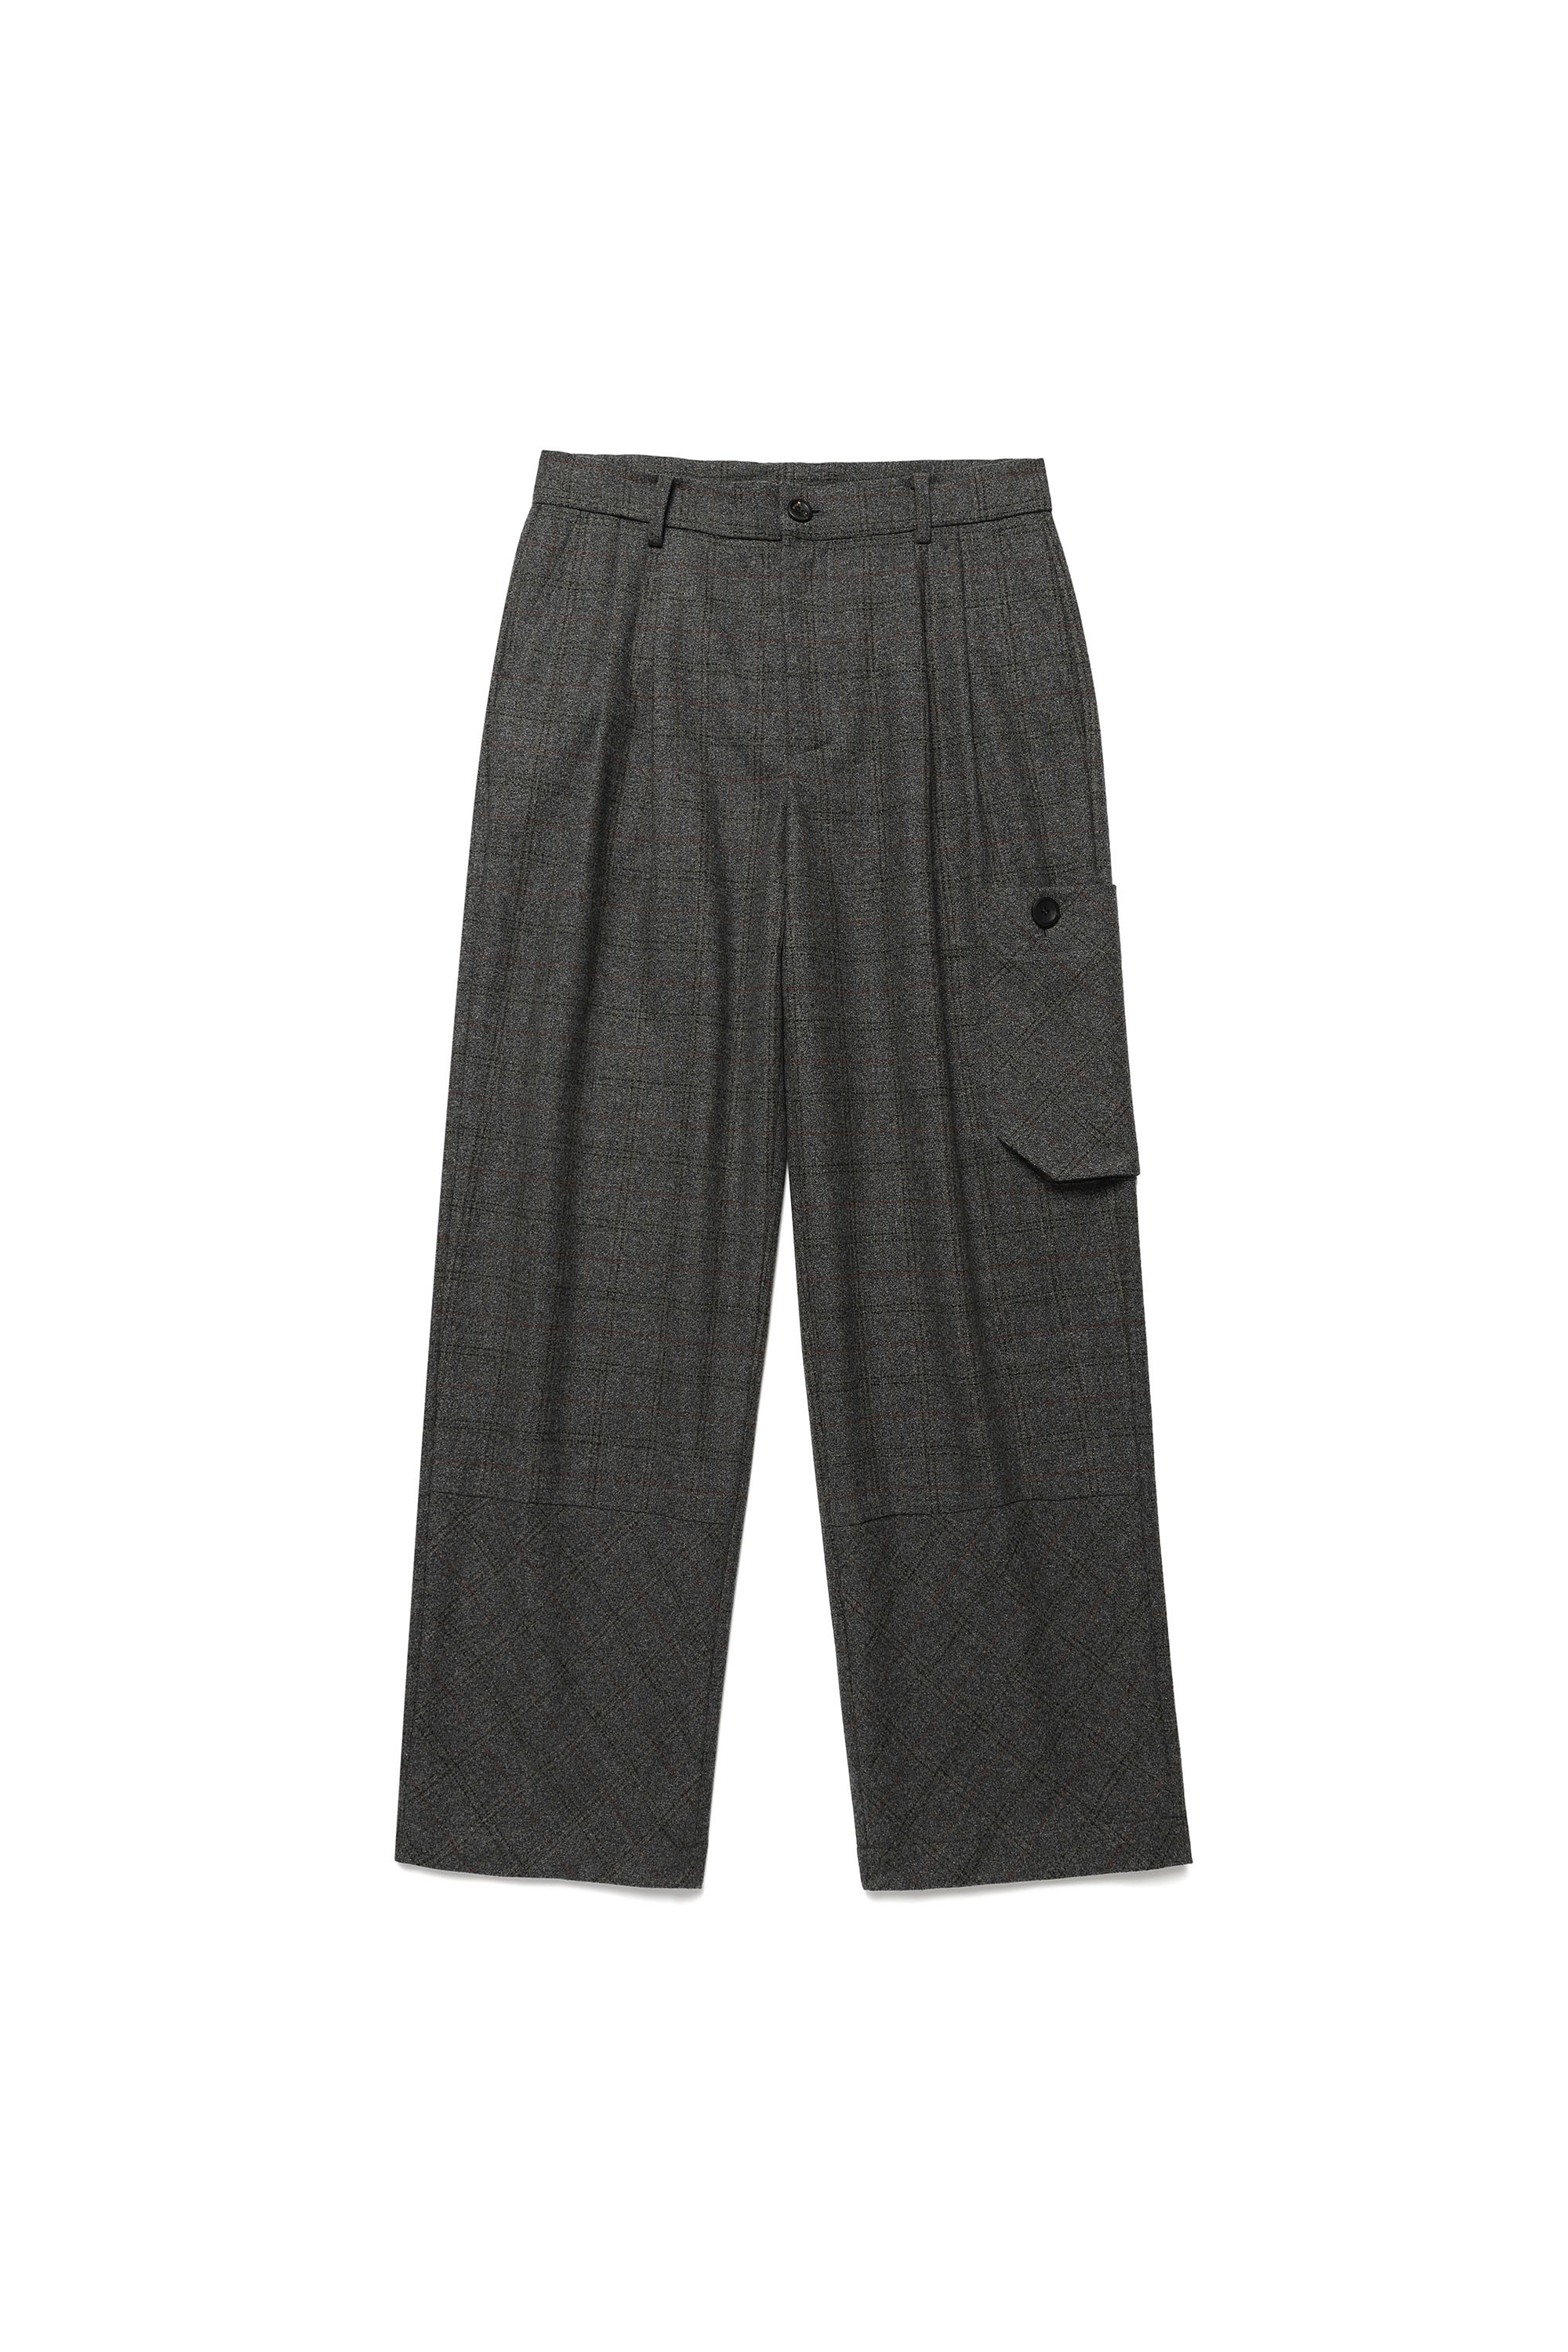 WOOL CHECK OUT POCKET STRING PANTS - CHARCOAL